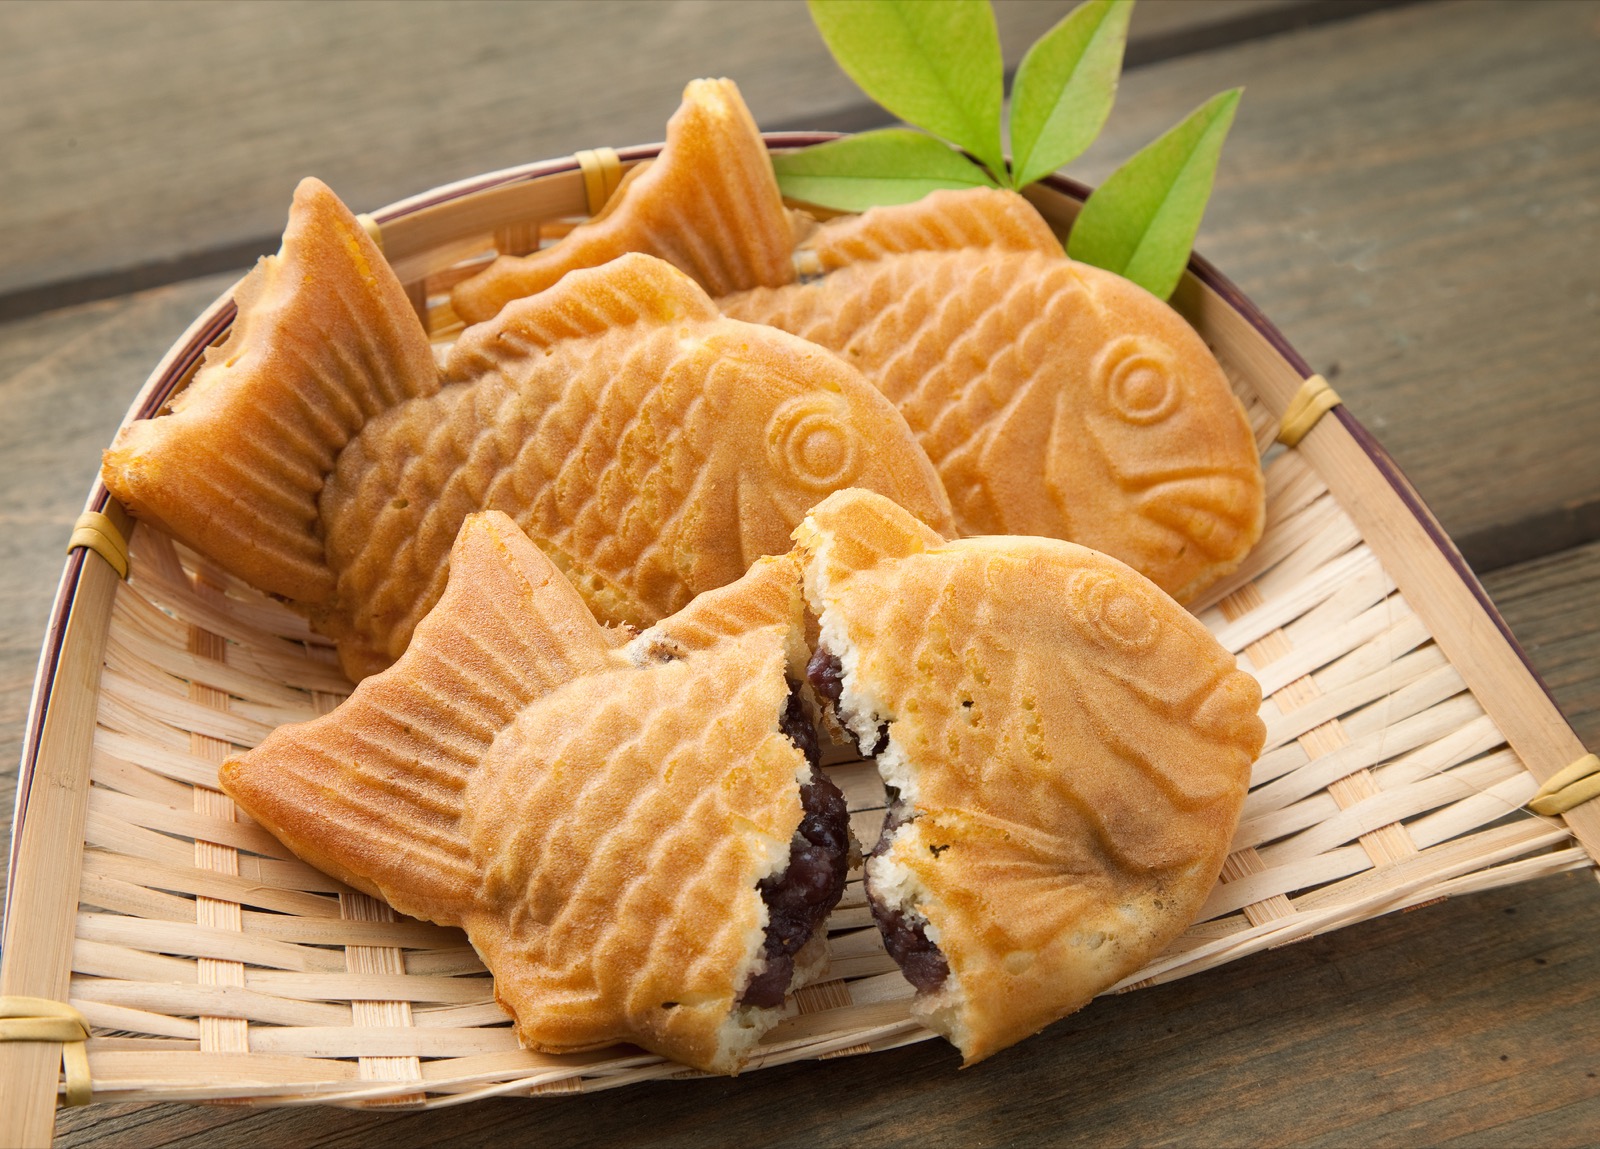 🌭 Here Are 24 Street Foods Around the World – Can You Match Them to Their Continent? Red Bean Taiyaki